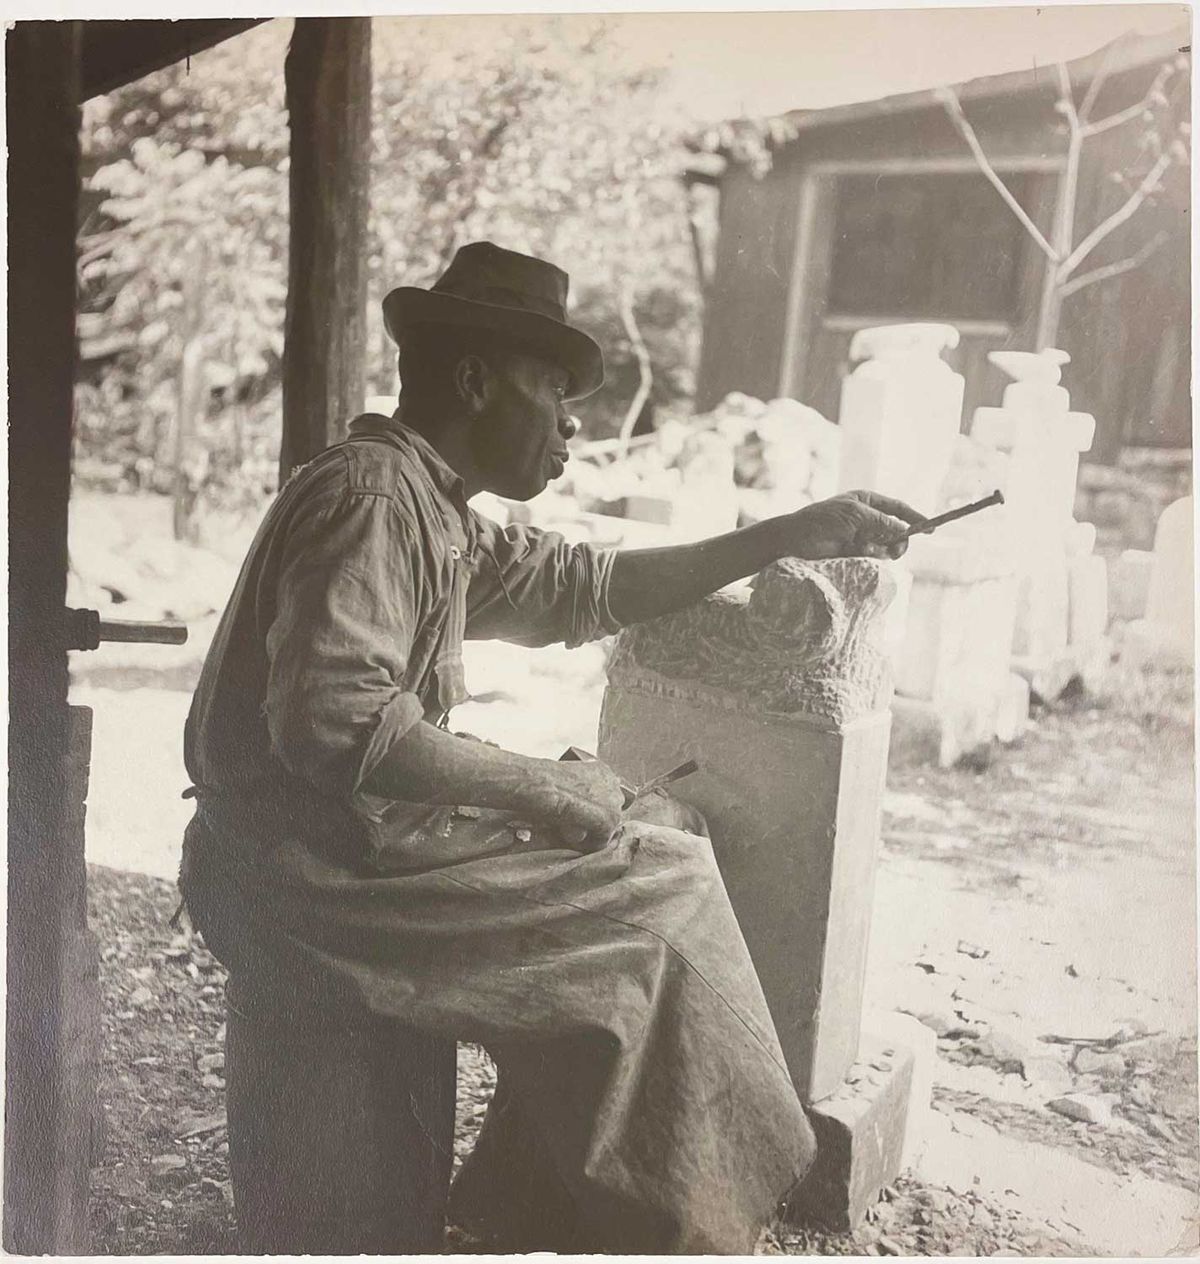 The show at Philadelphia’s Barnes Foundation includes Louise Dahl-Wolfe’s 1937 photograph of William Edmondson

© Center for Creative Photography, Arizona Board of Regents
